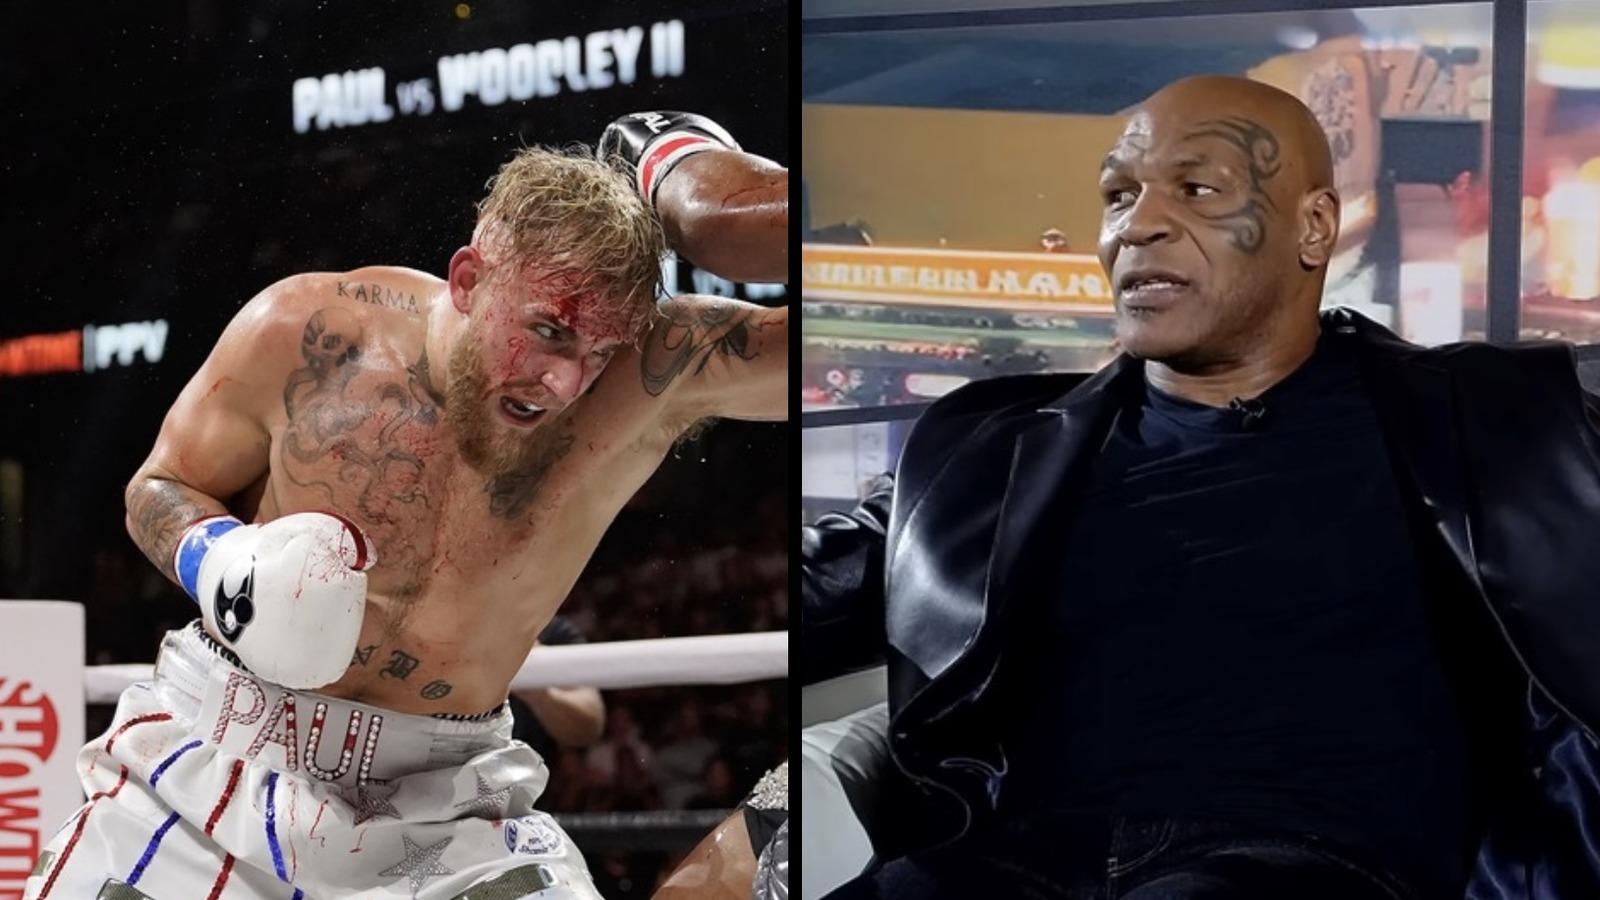 Mike Tyson sent a bold warning at Jake Paul ahead of their July 20 boxing match